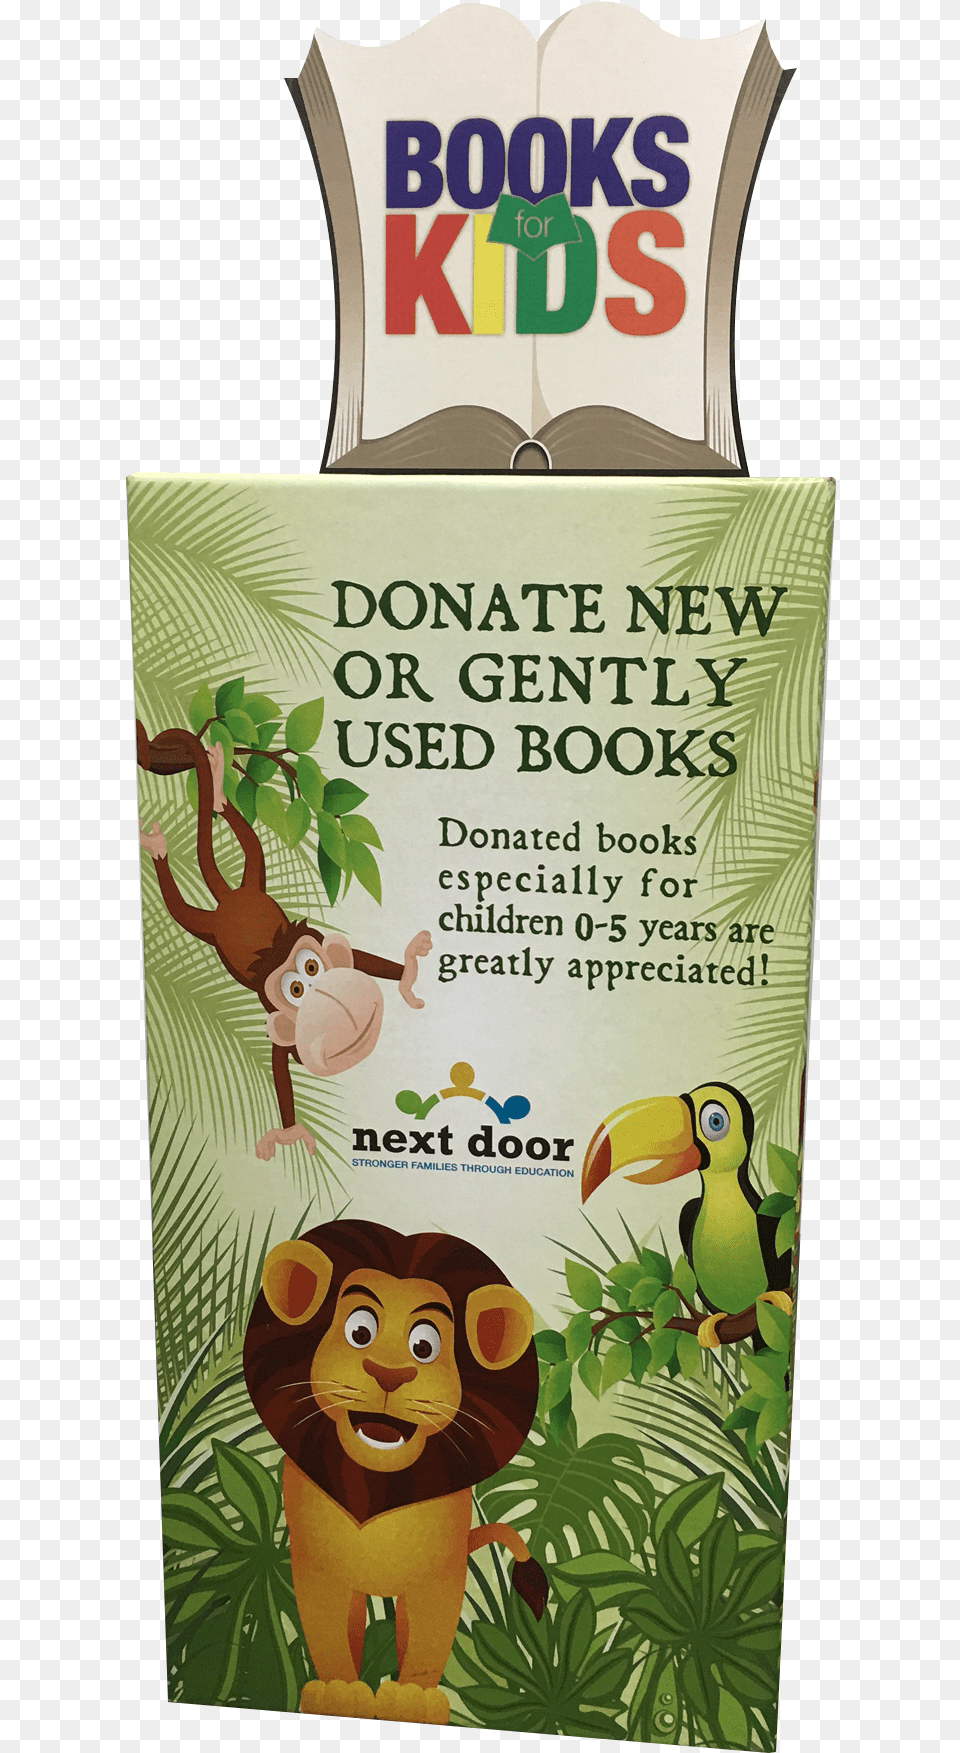 Books For Kids Next Door Foundation, Advertisement, Poster, Publication, Book Free Png Download